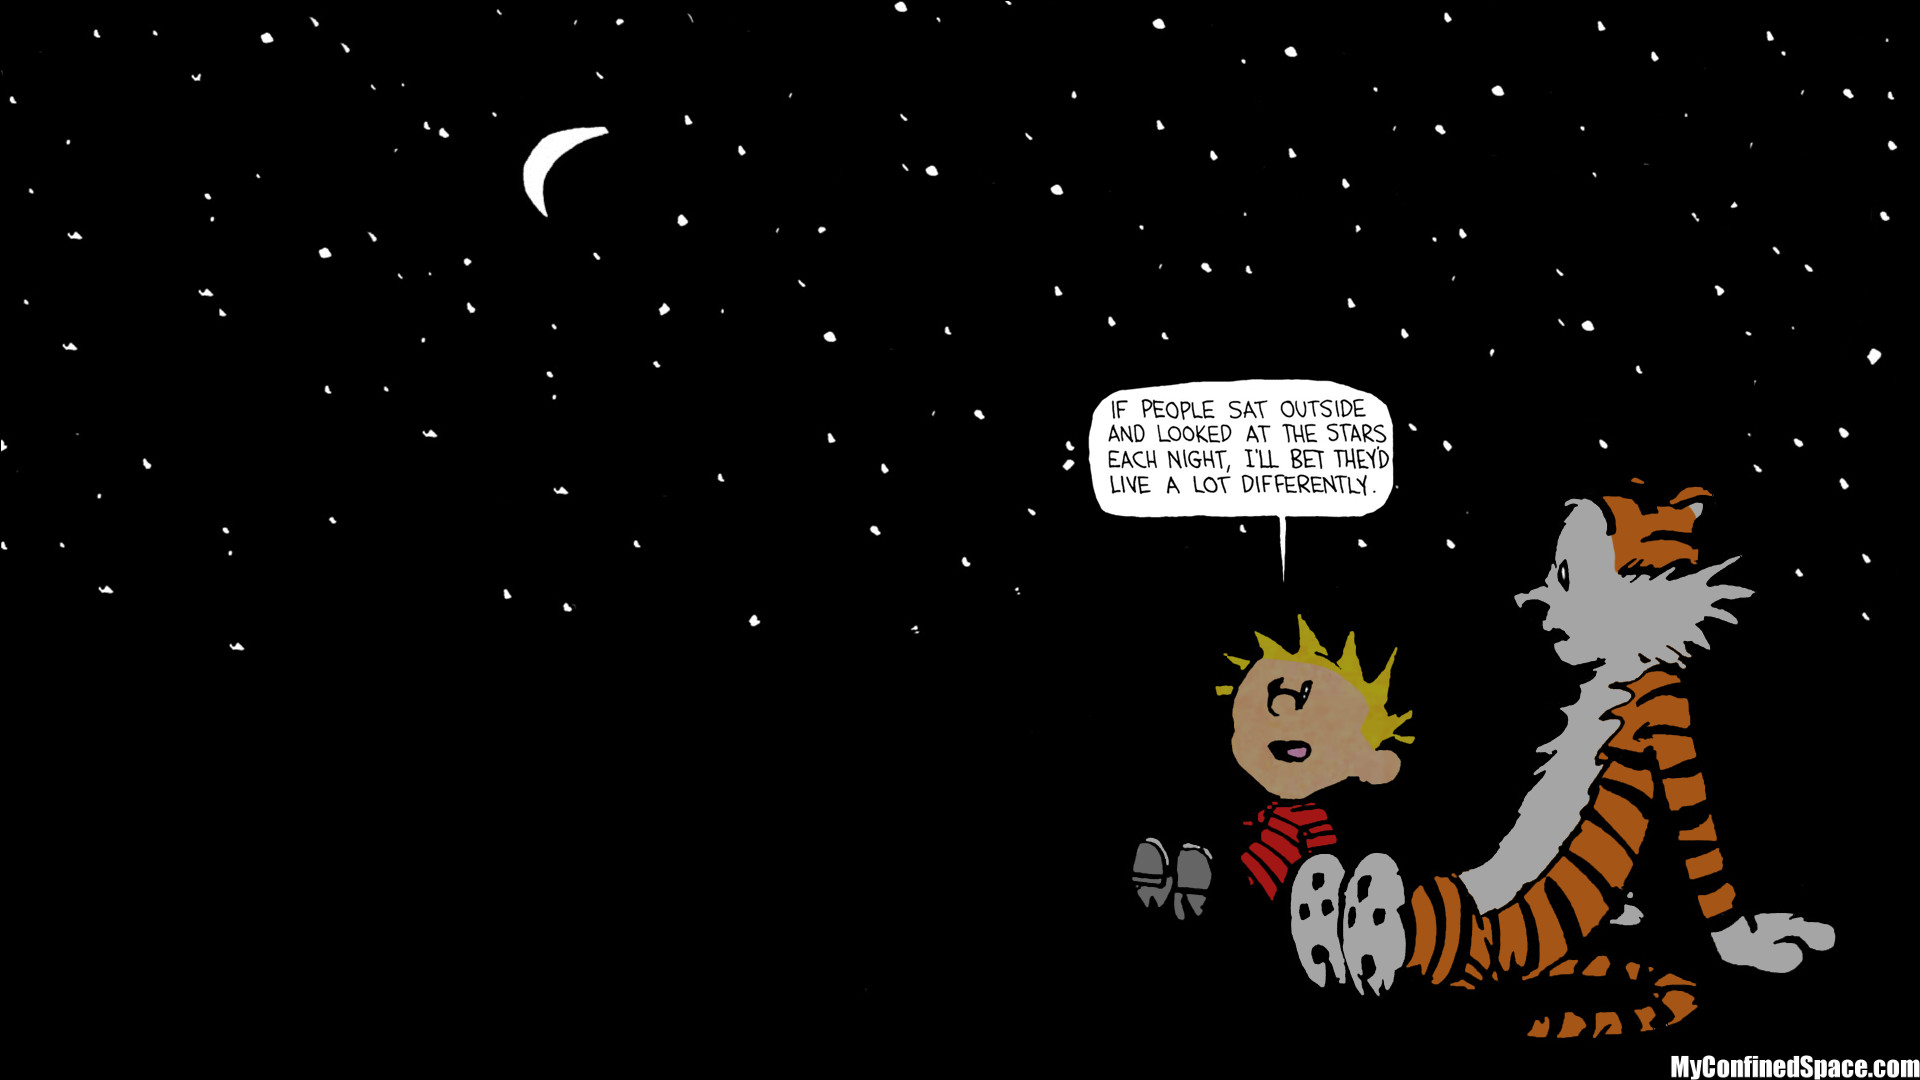 1920x1080 calvin hobbes stars quote - Google Search